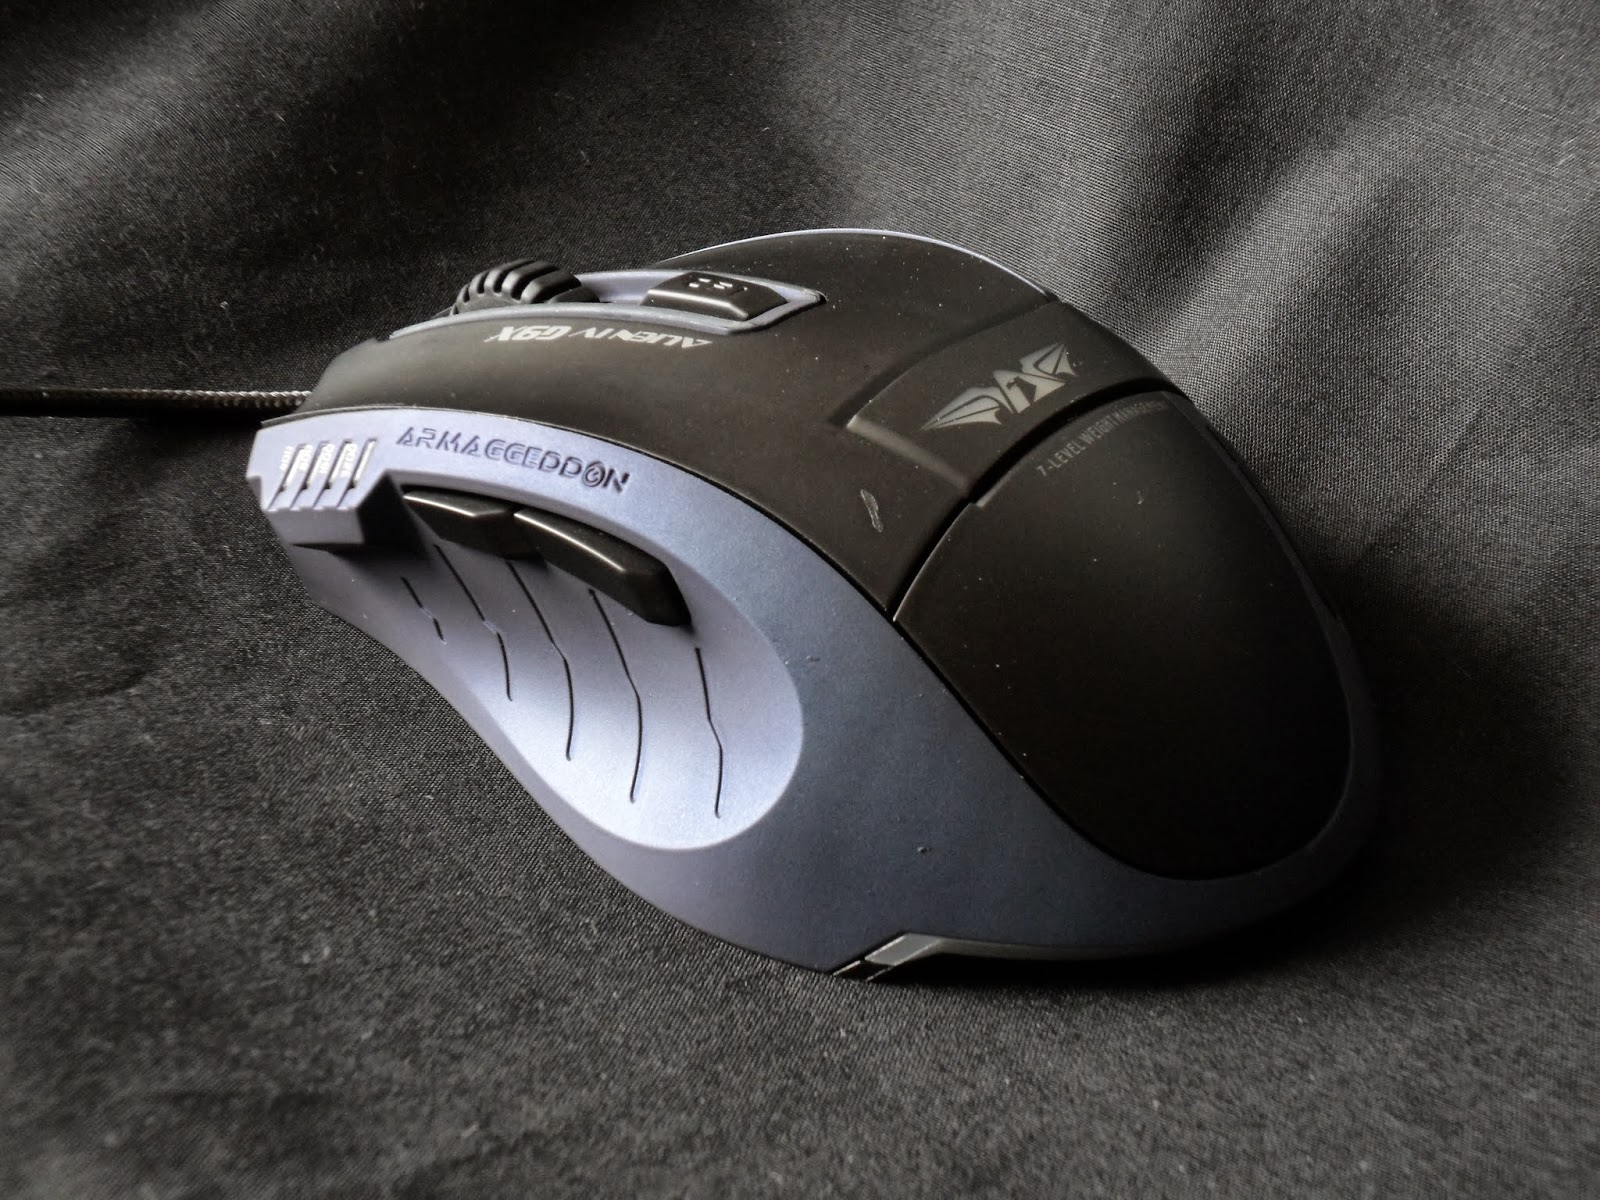 First Look & Review - Armaggeddon Alien IV G9X Optical Gaming Mouse 8